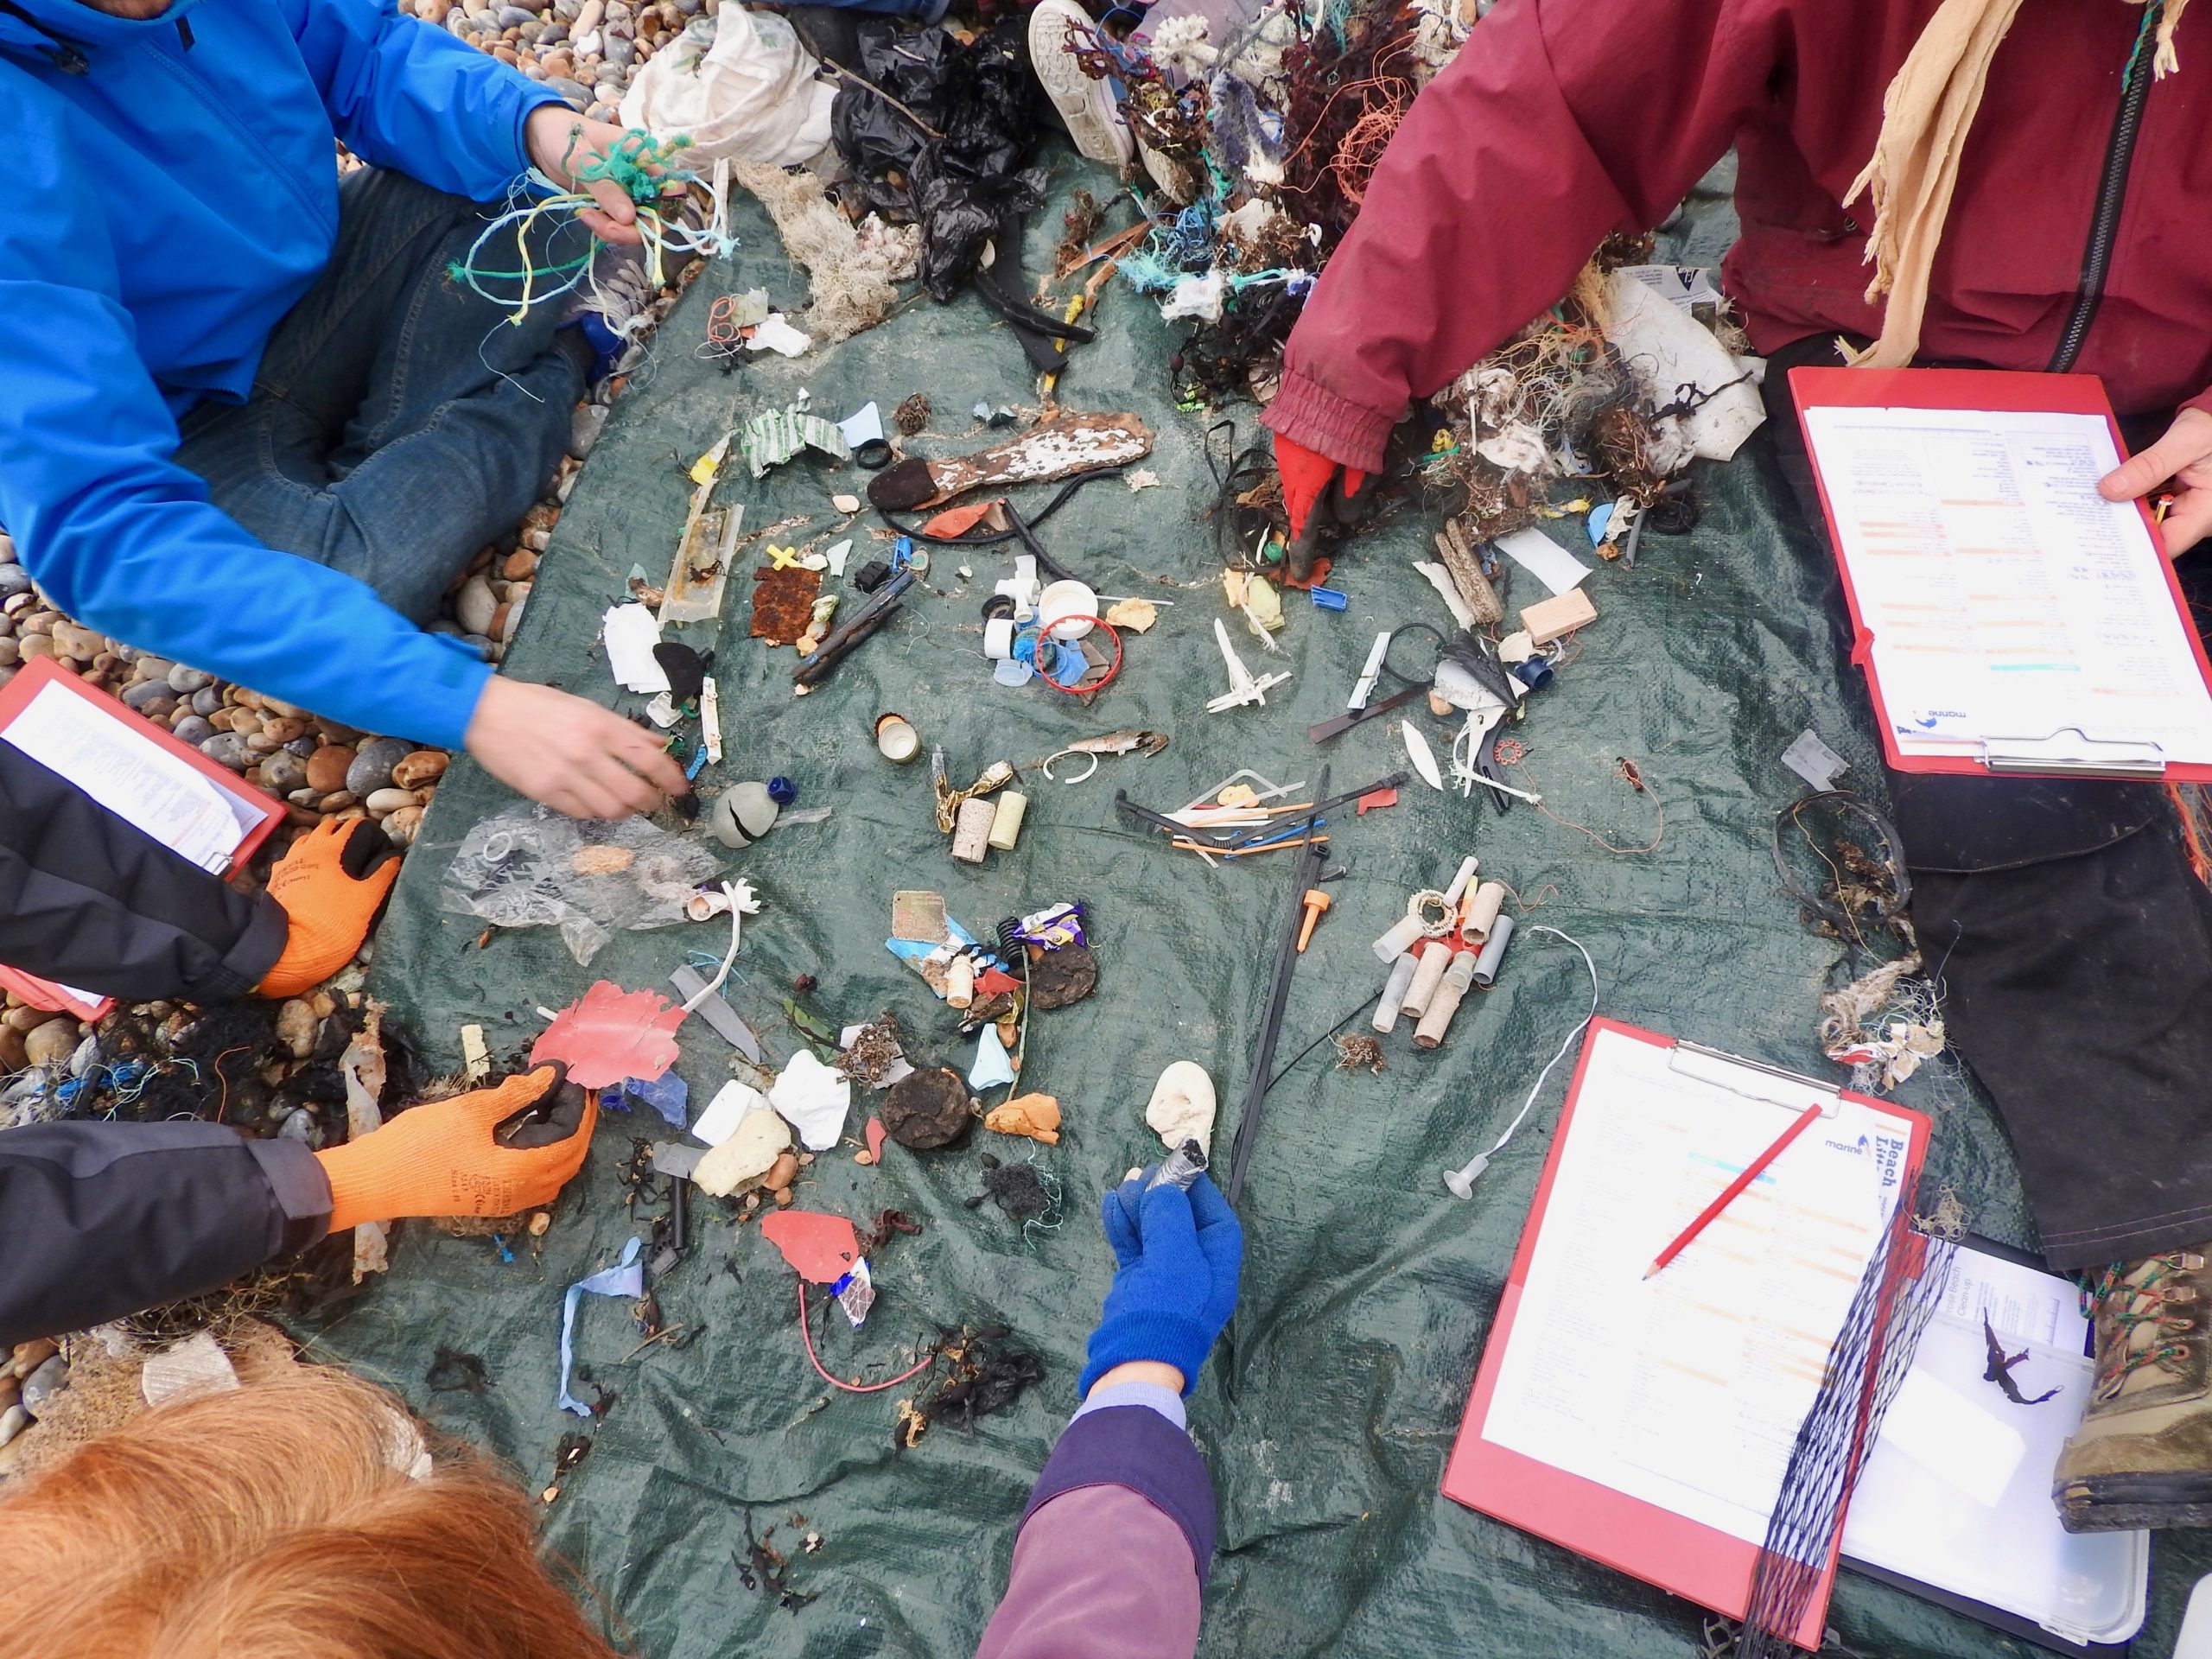 Marine debris survey by Andy DInsdale and Strandliners